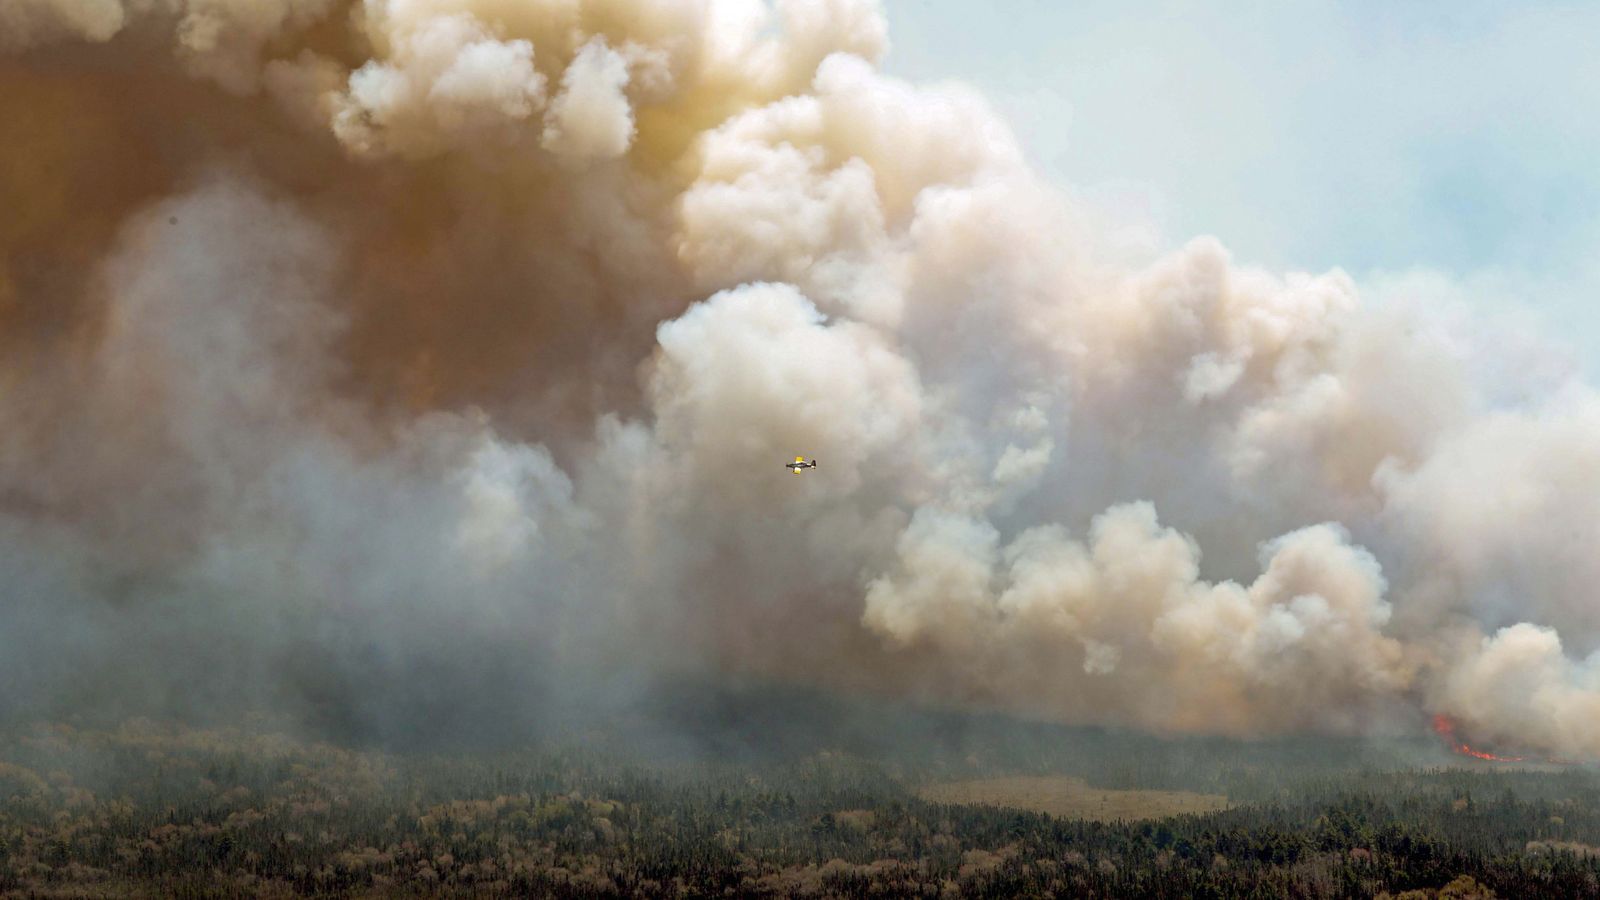 Reach widened by Canada’s record wildfire season